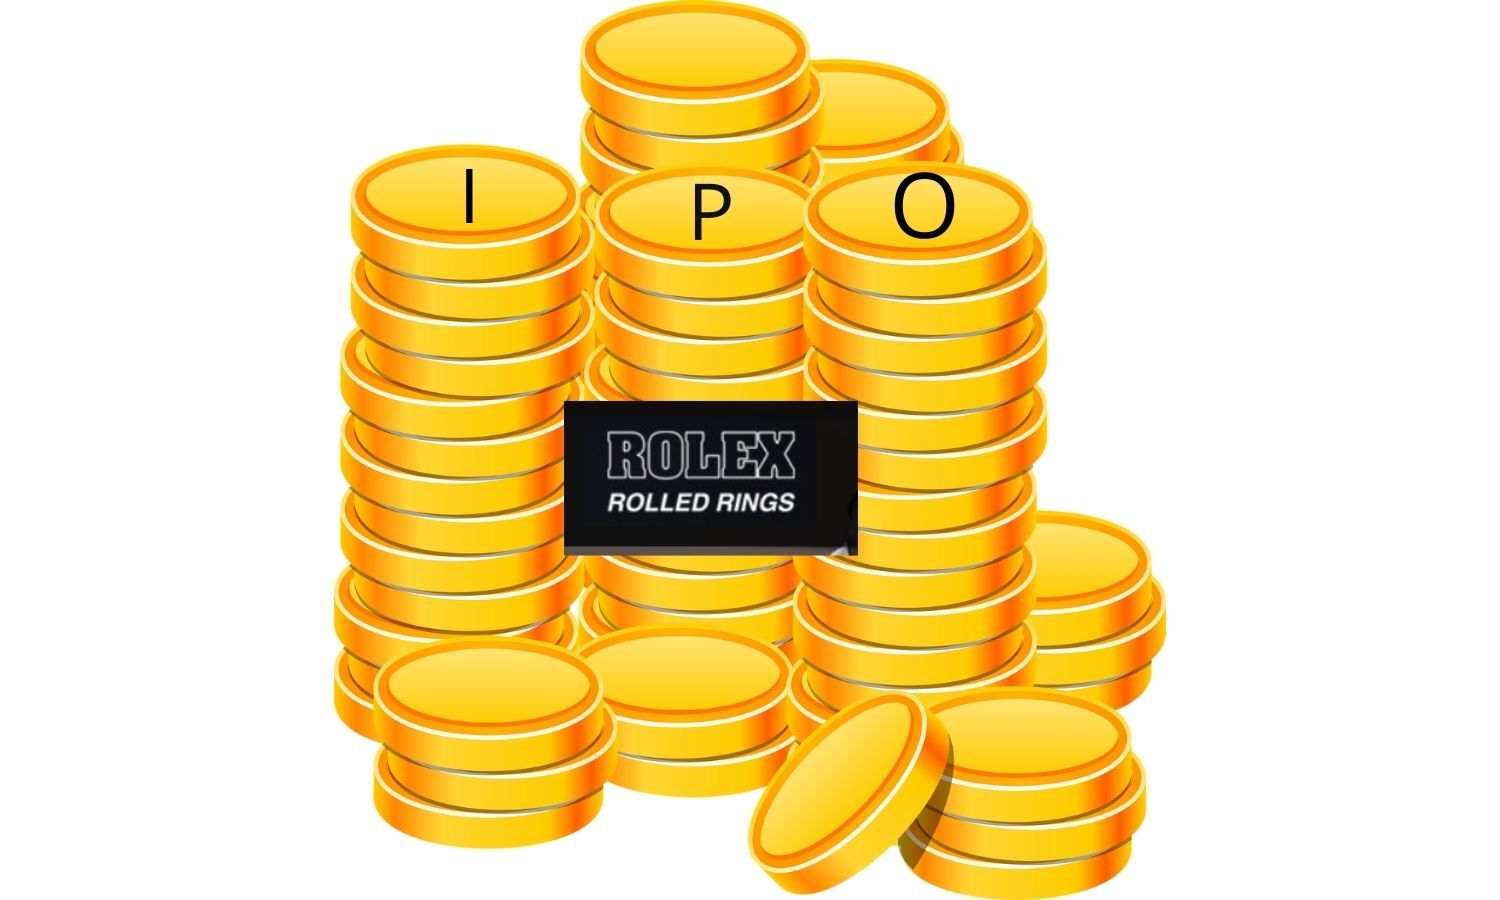 Subscribe to Rolex Rings: Arihant Capital